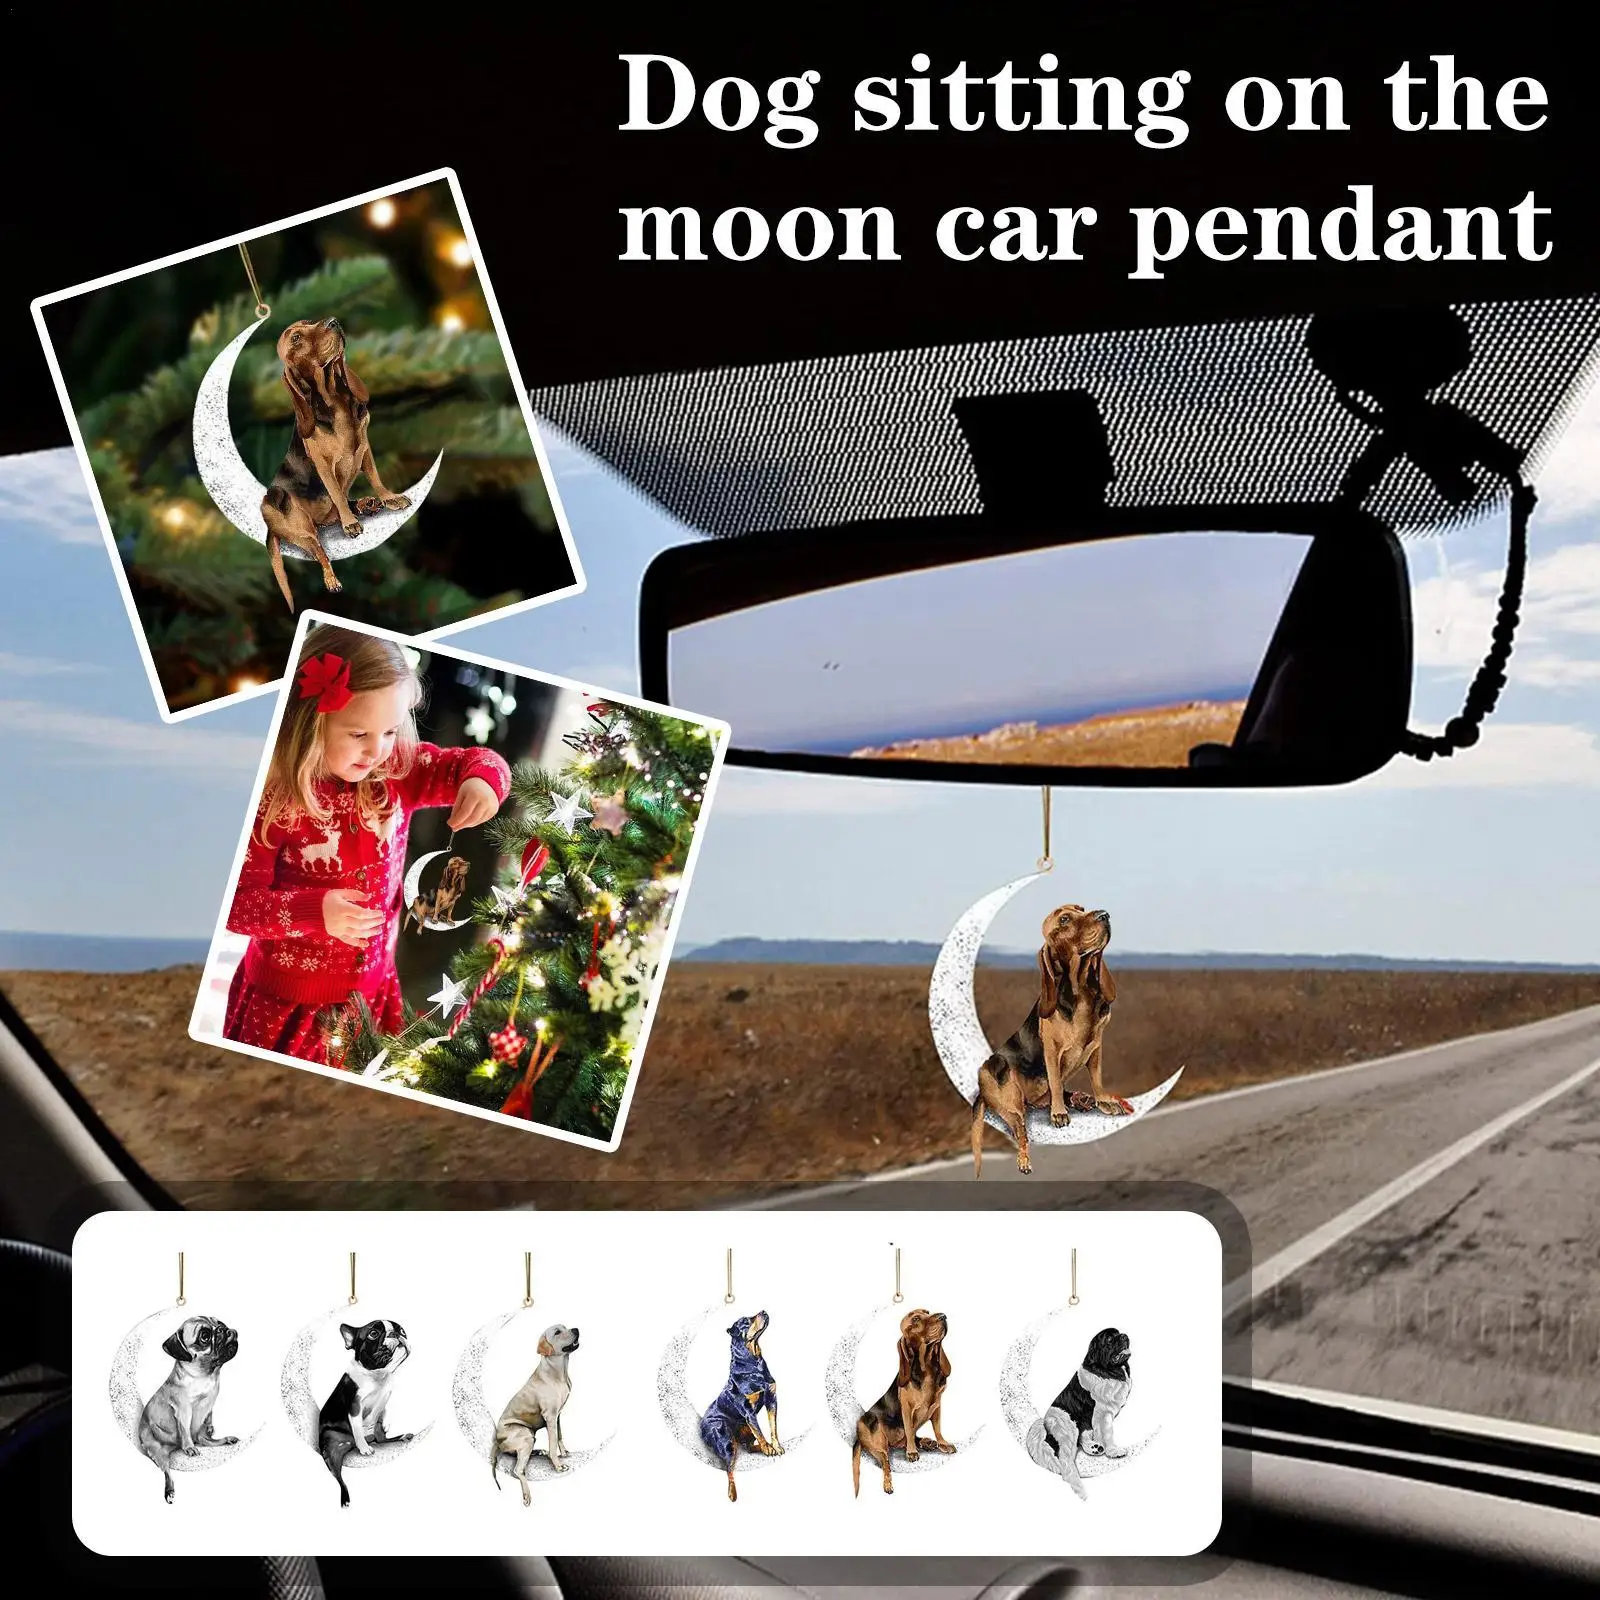 

2D Car Rearview Mirror Pendant Dog Pendant Sitting On The Moon Cute Teddy Puppy Hanging Ornament Keychain Pendant Interior Decor